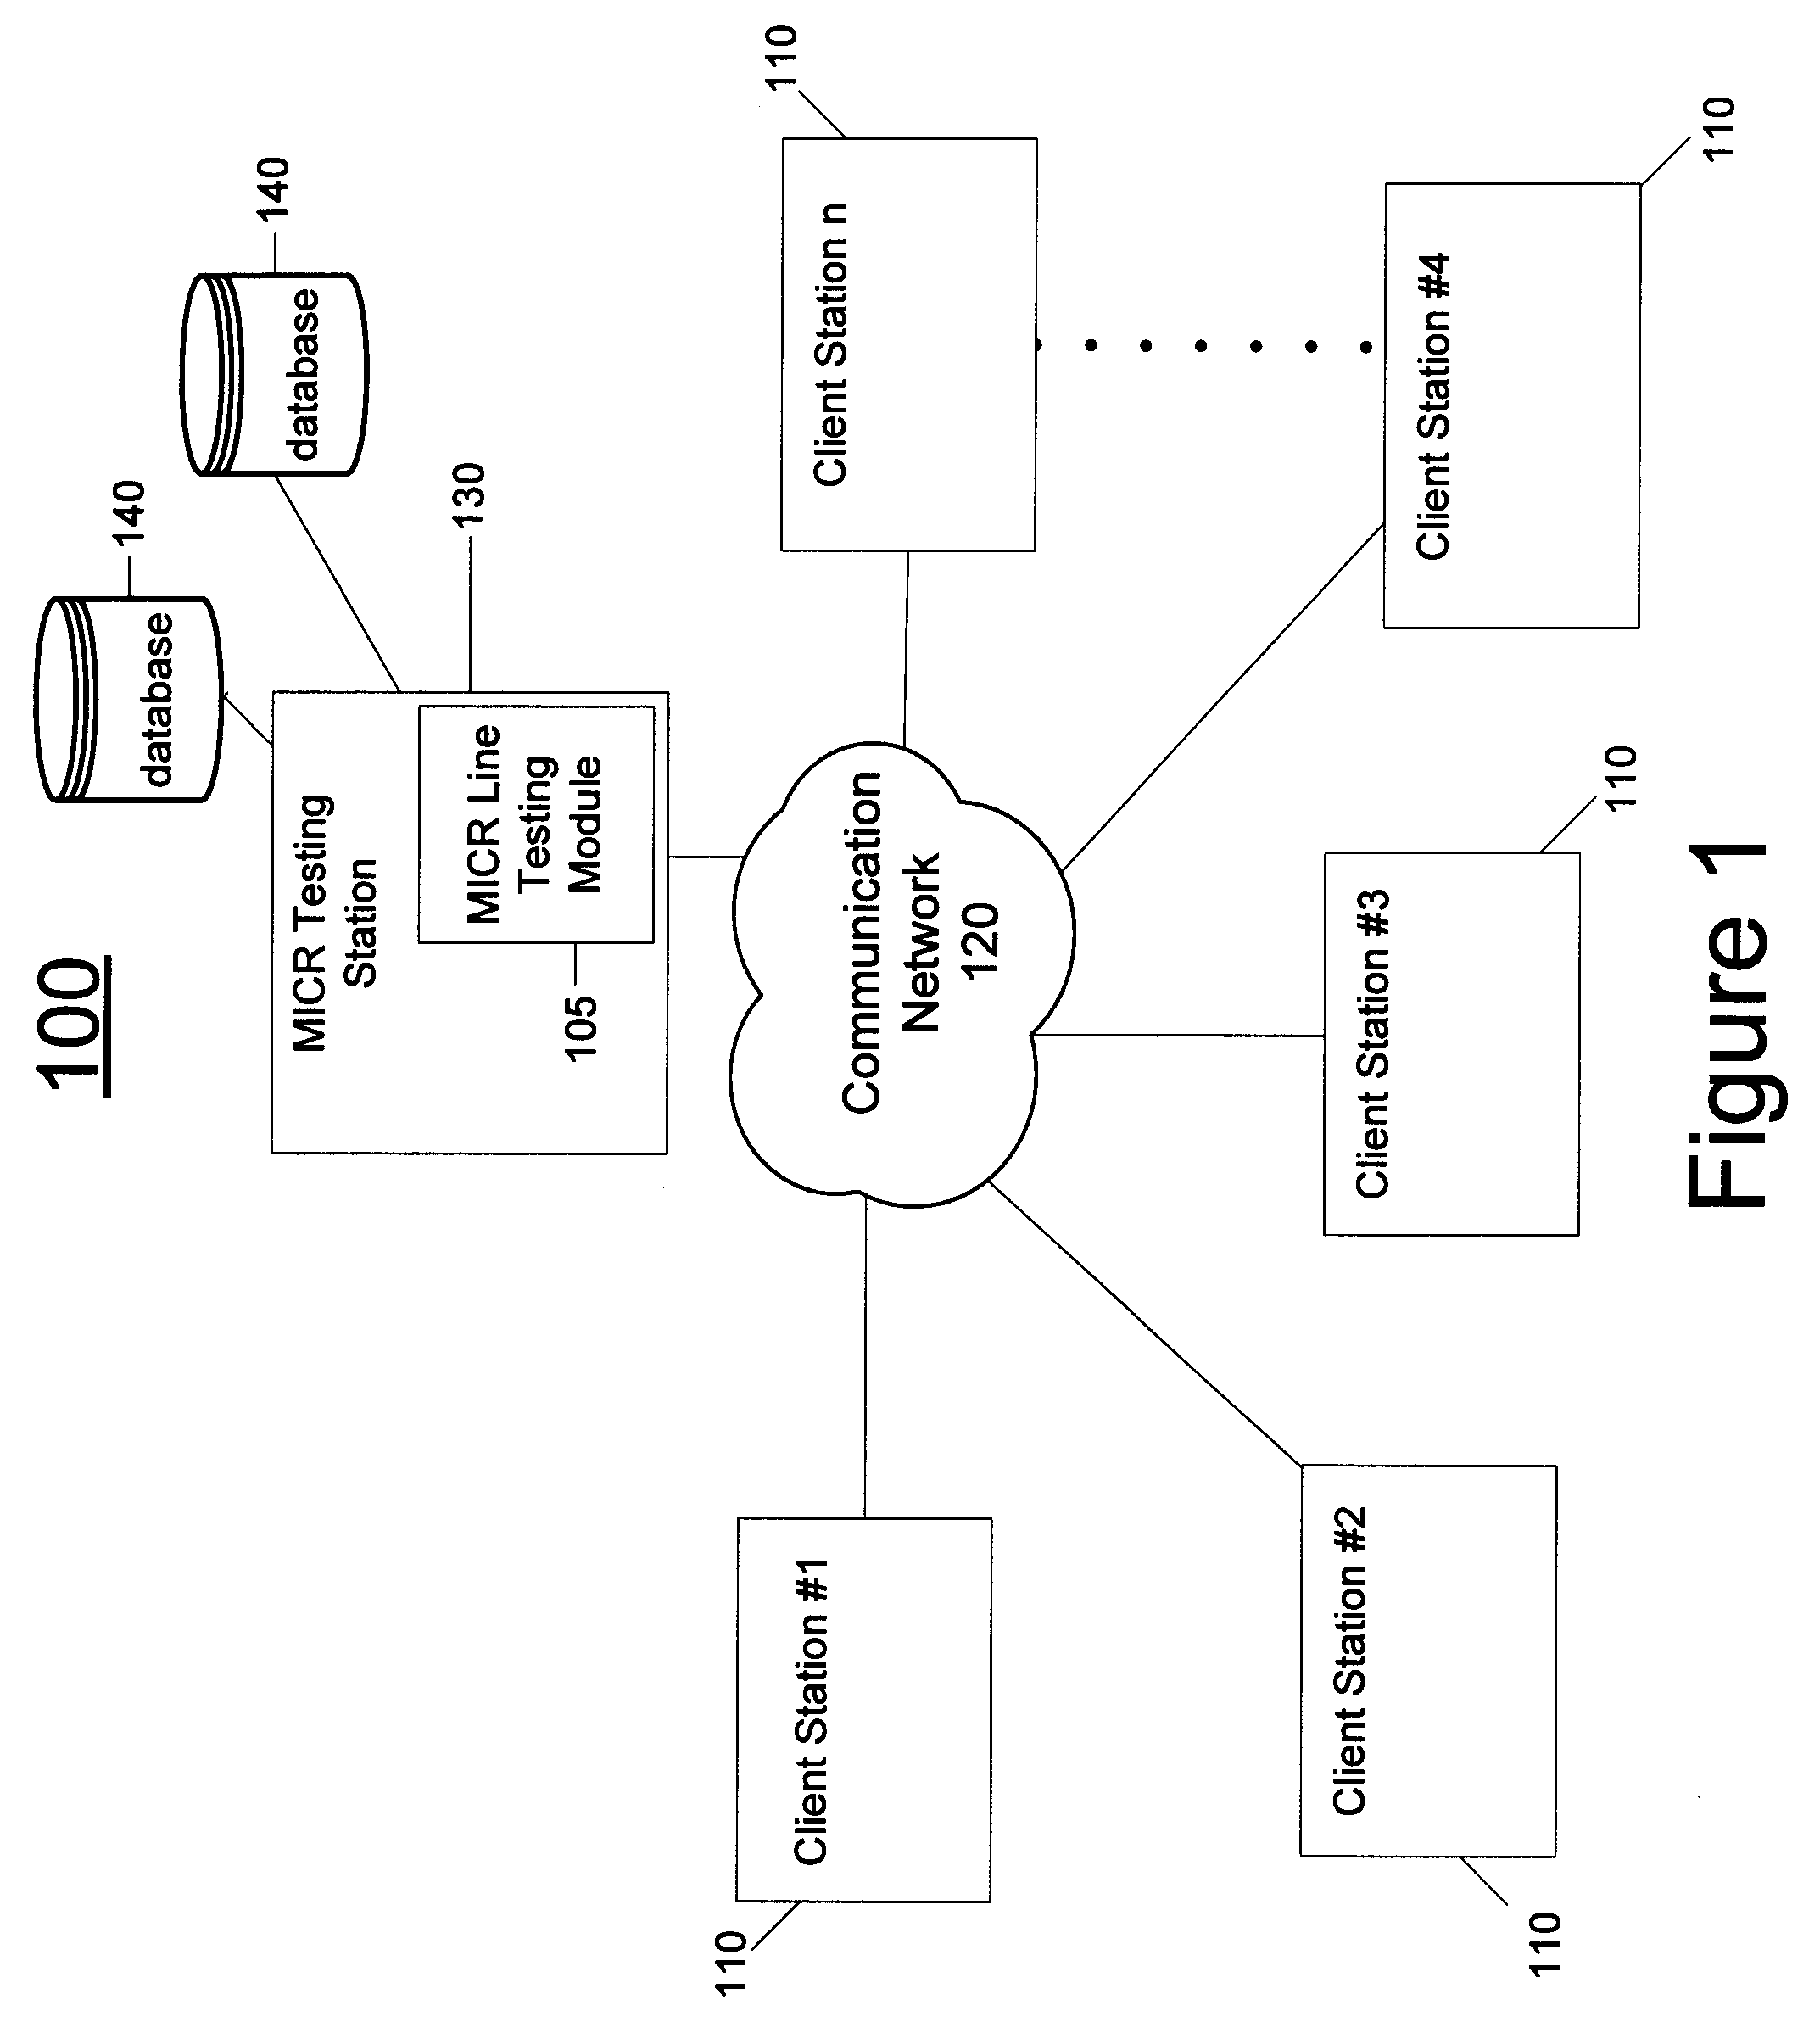 System and Method for Generating Magnetic Ink Character Recognition (MICR) Testing Documents